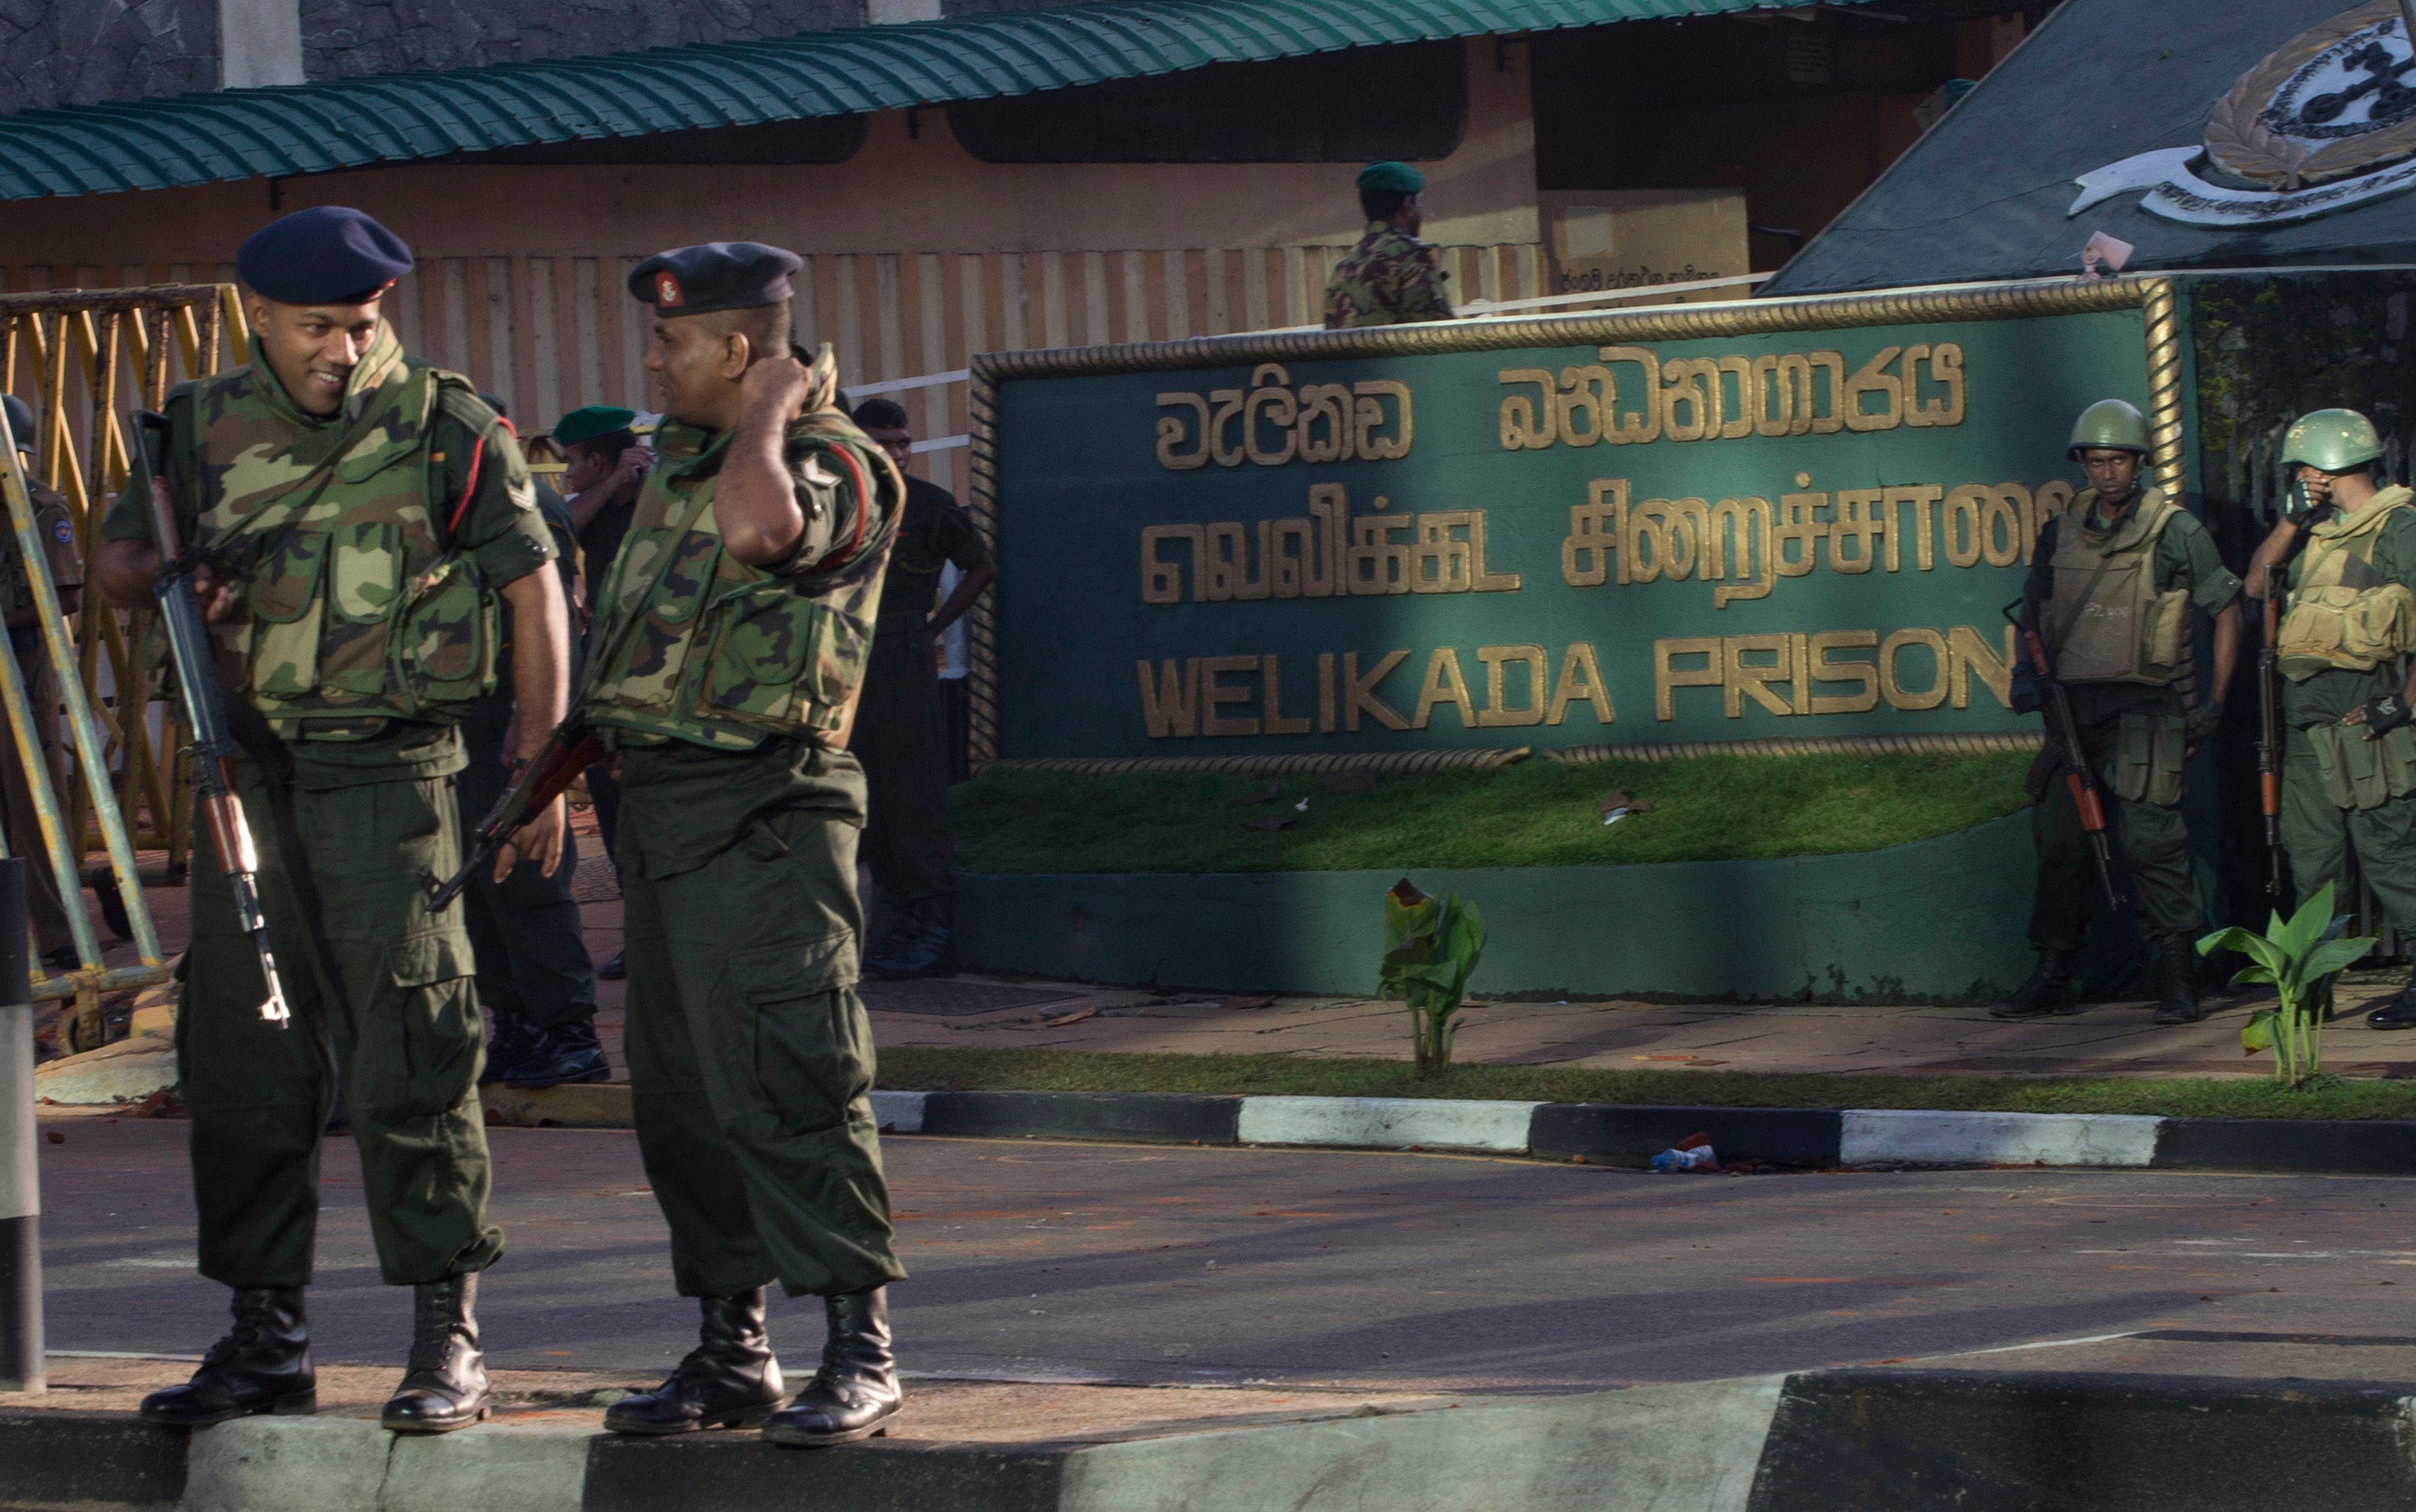 Armed soldiers stand in front of a building with a sign that reads "Welikada Prison"